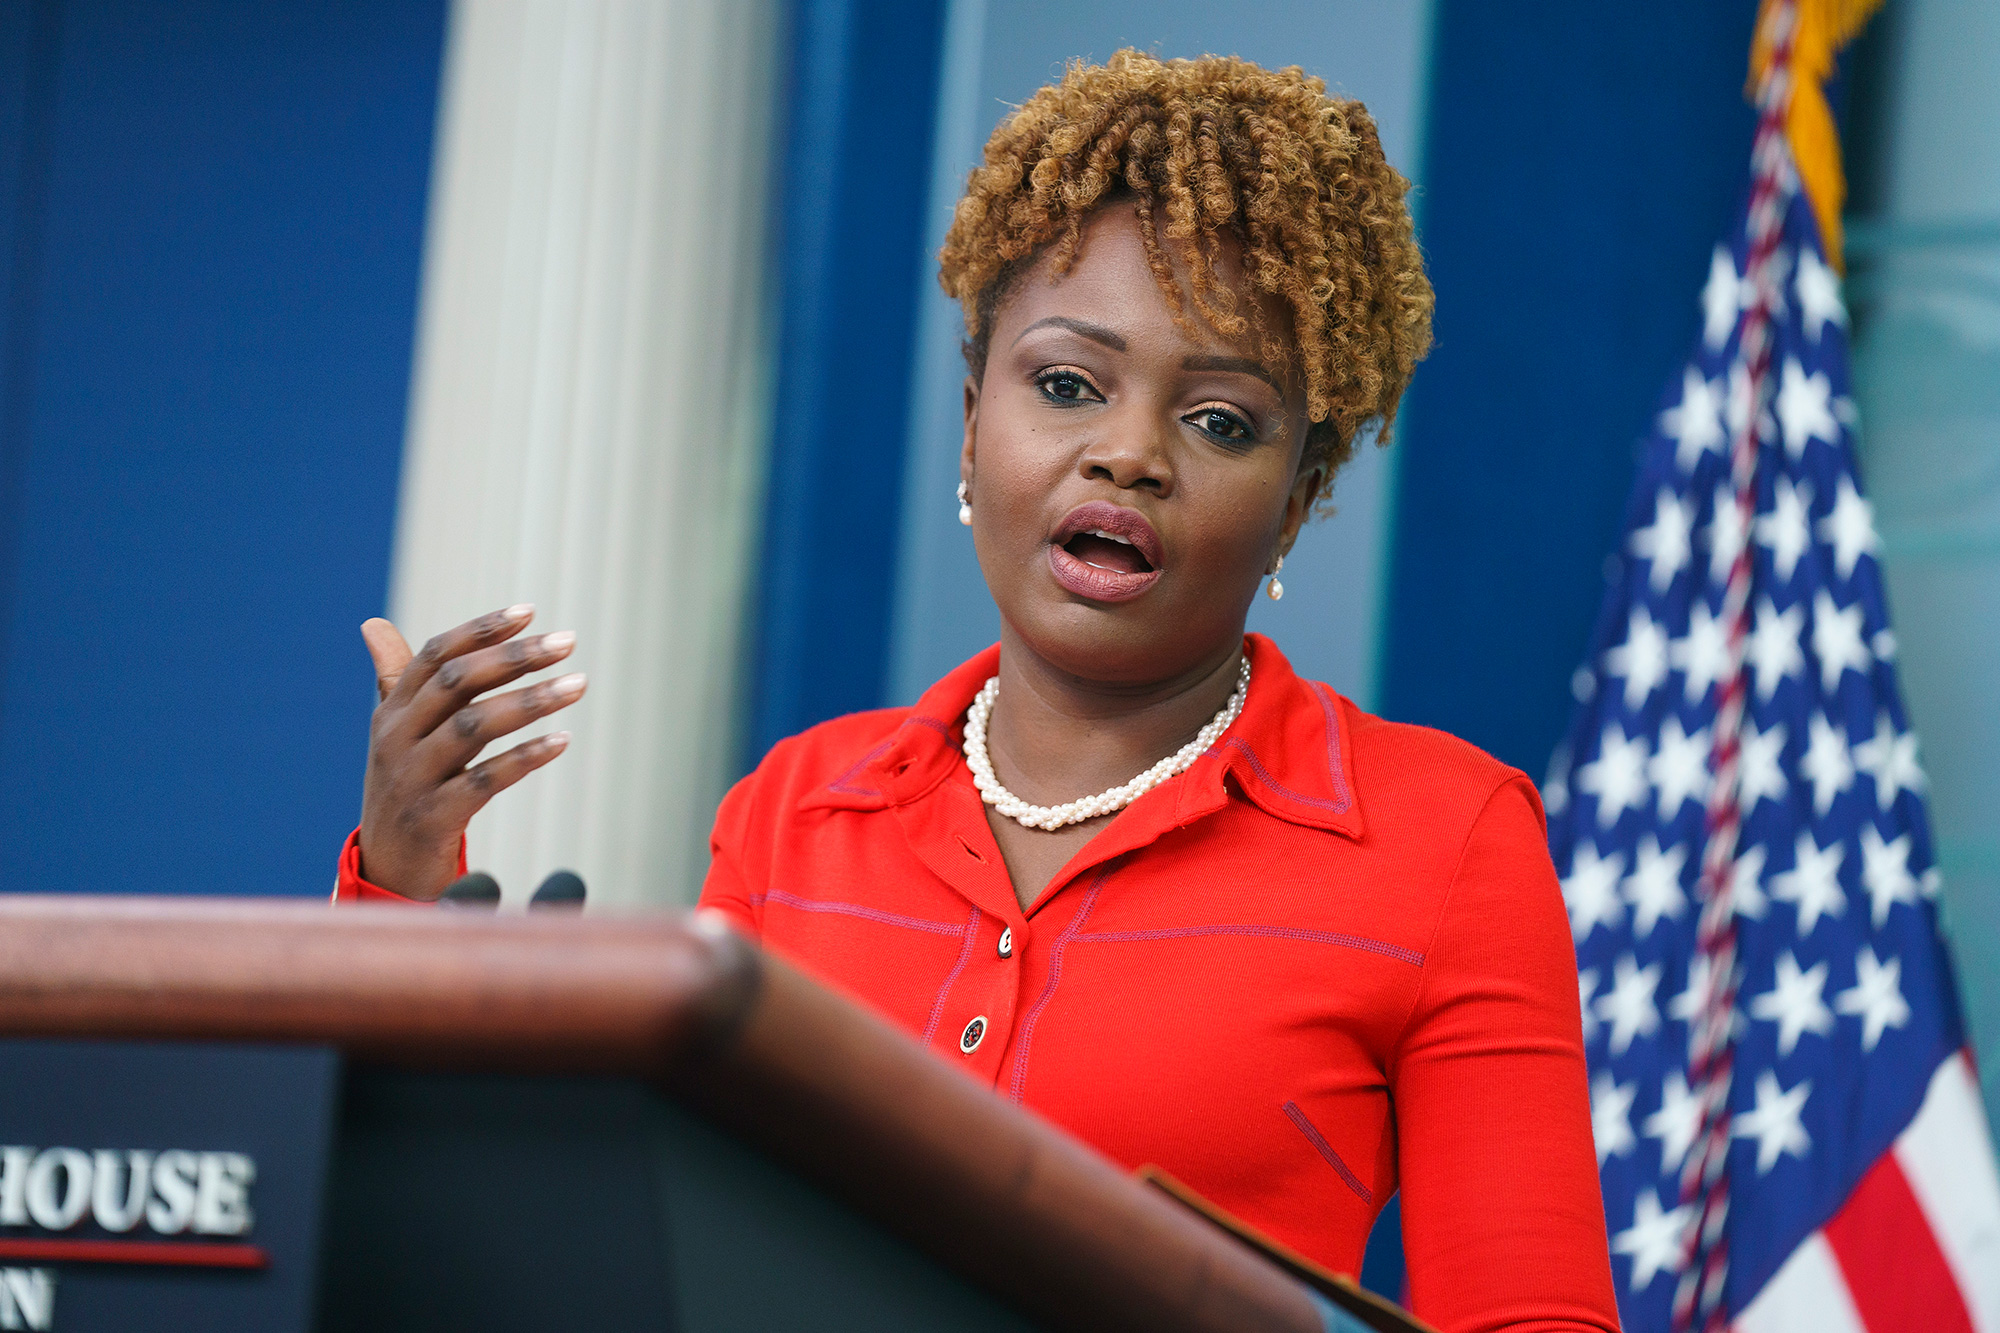 White House press secretary Karine Jean-Pierre speaks during a briefing at the White House in Washington DC, on May 9.